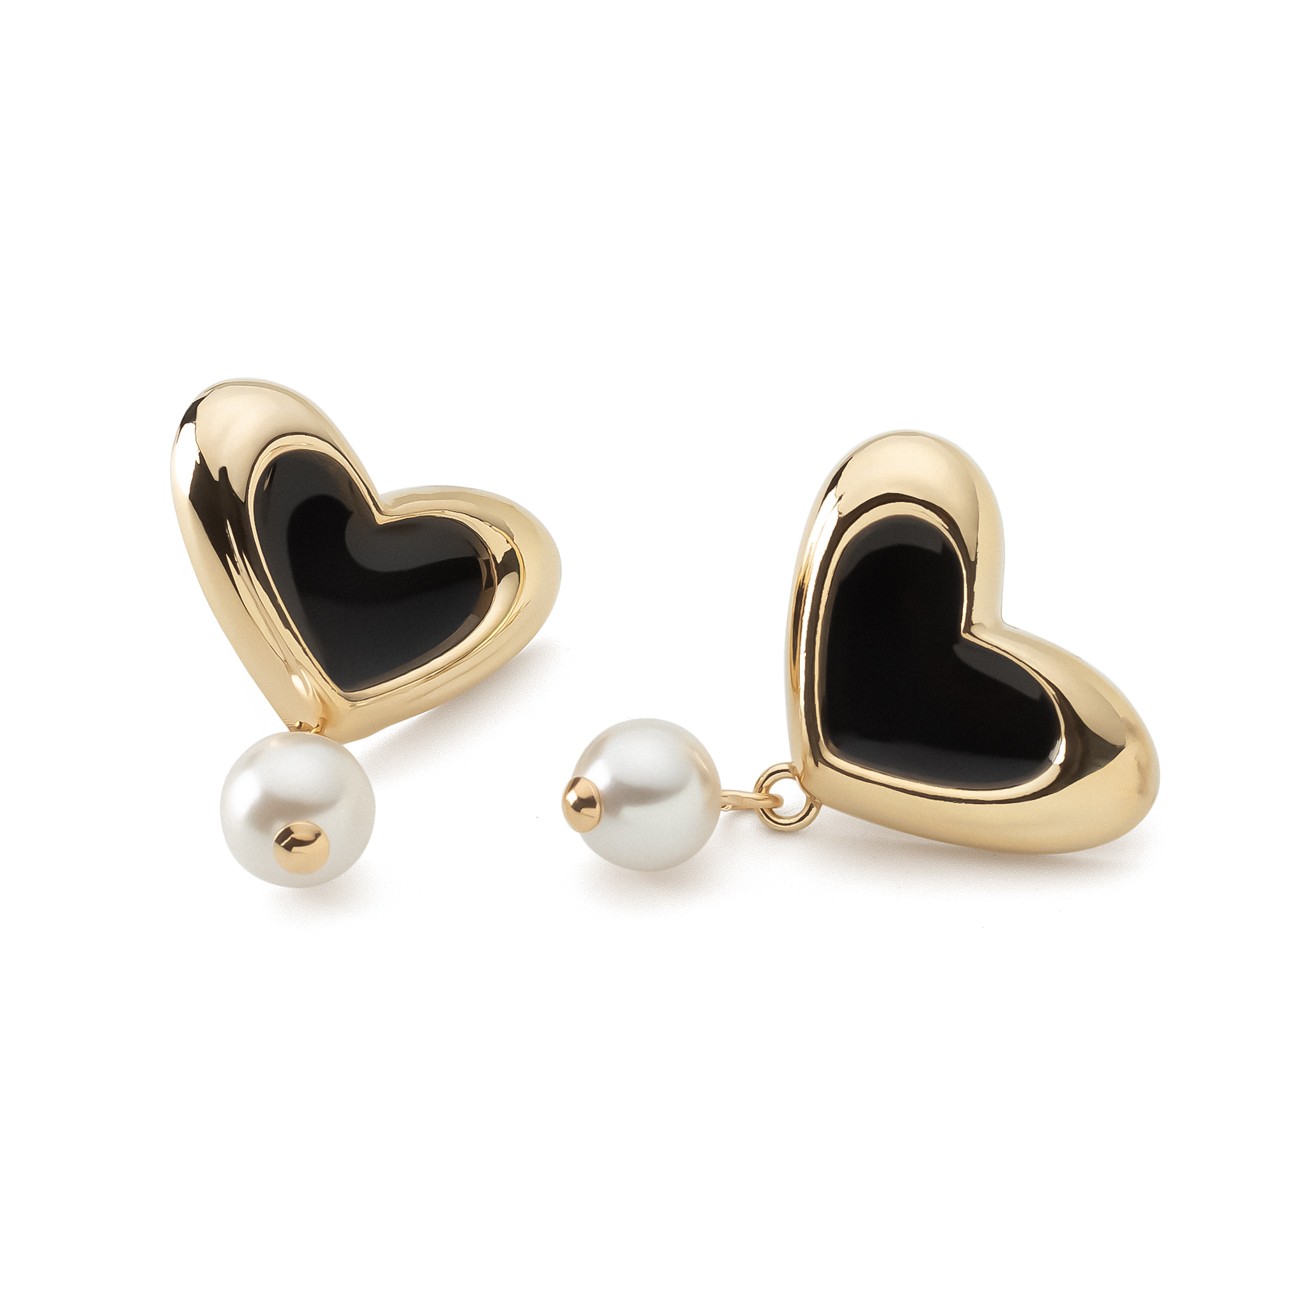 Heart earrings with black resin and pearl, sterling silver 925